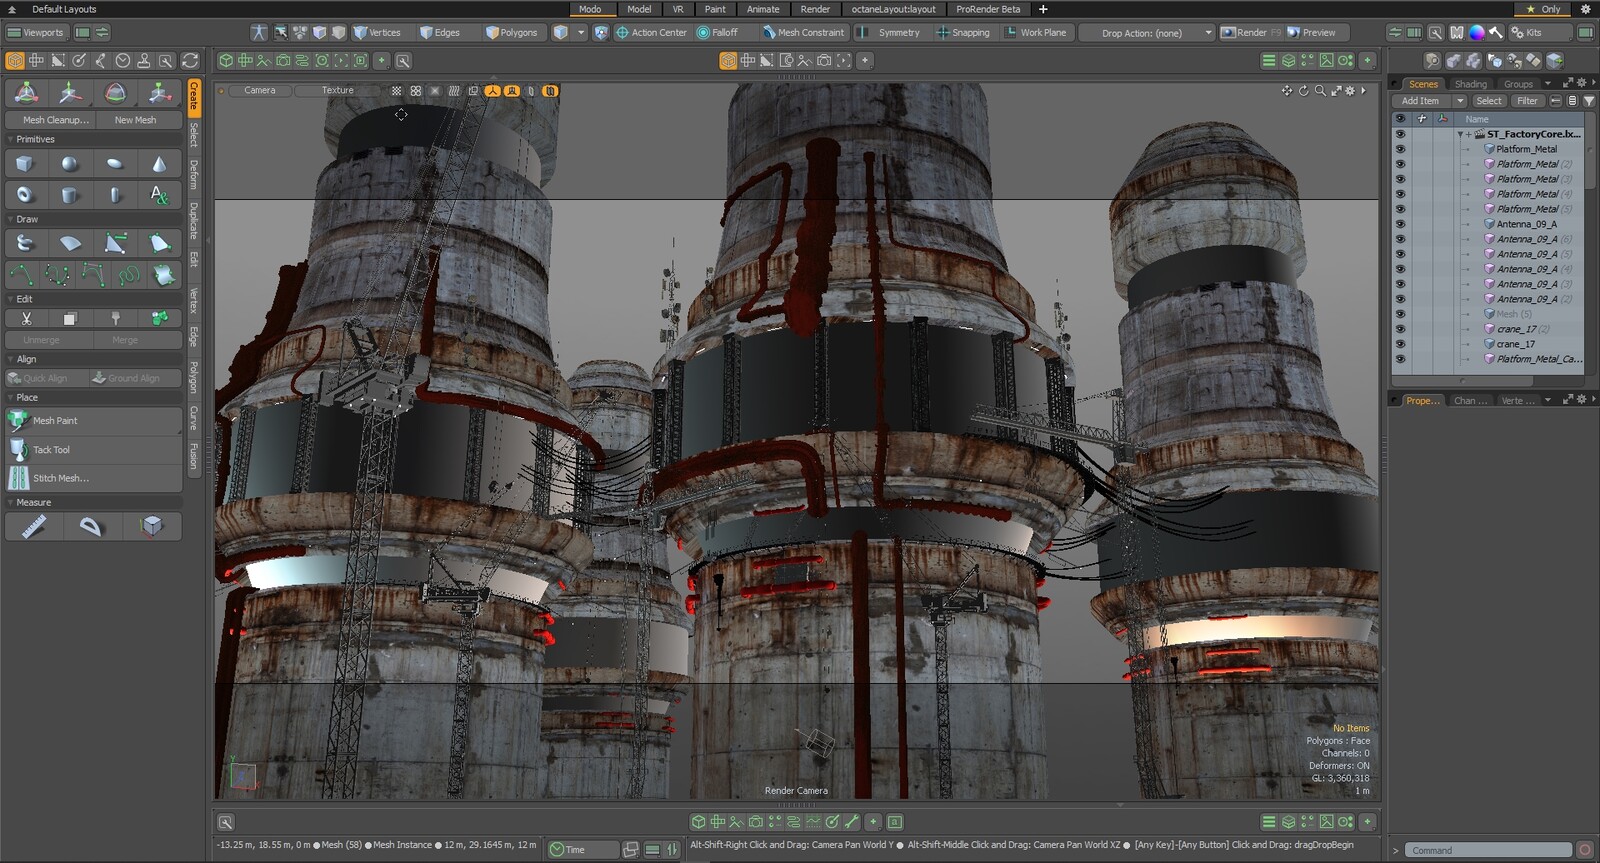 Here's the Modo view. Note that... they're really just cylinders.